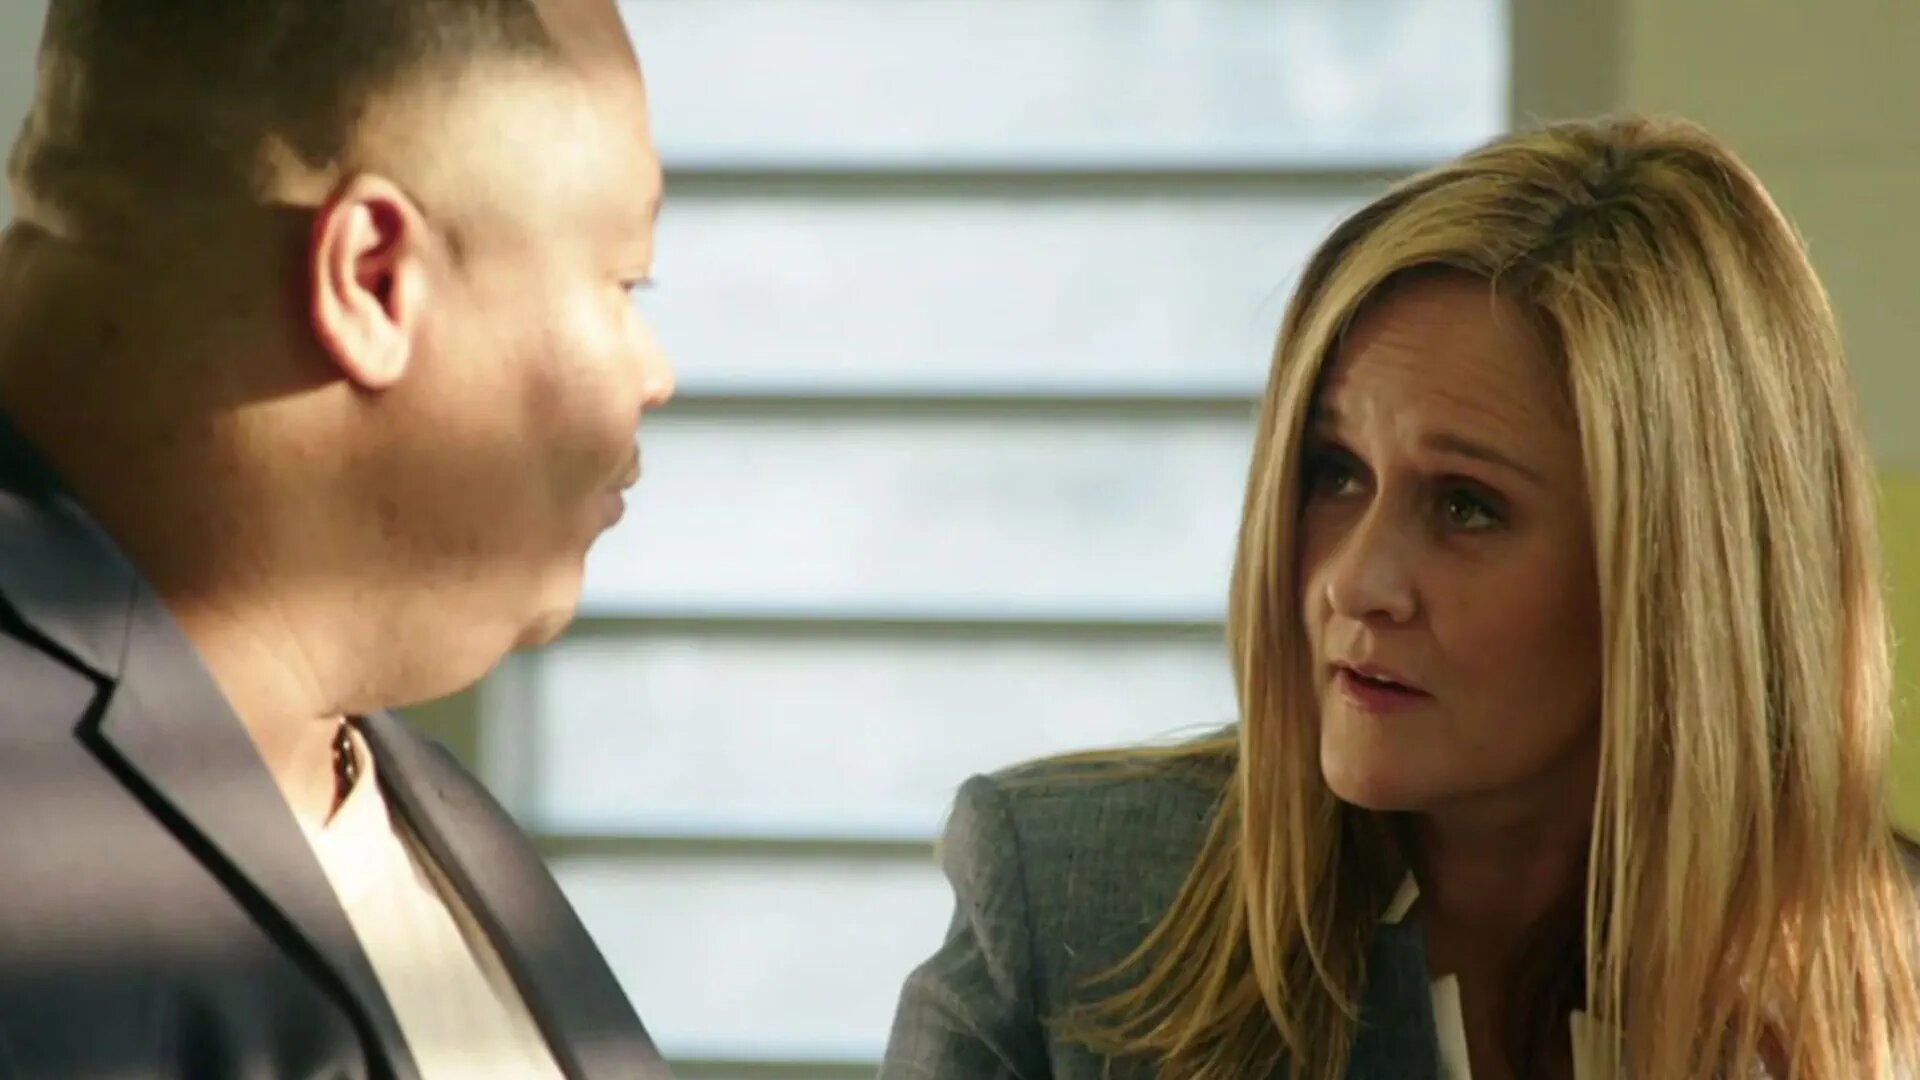 Full Frontal with Samantha Bee S2E11 June 14, 2017